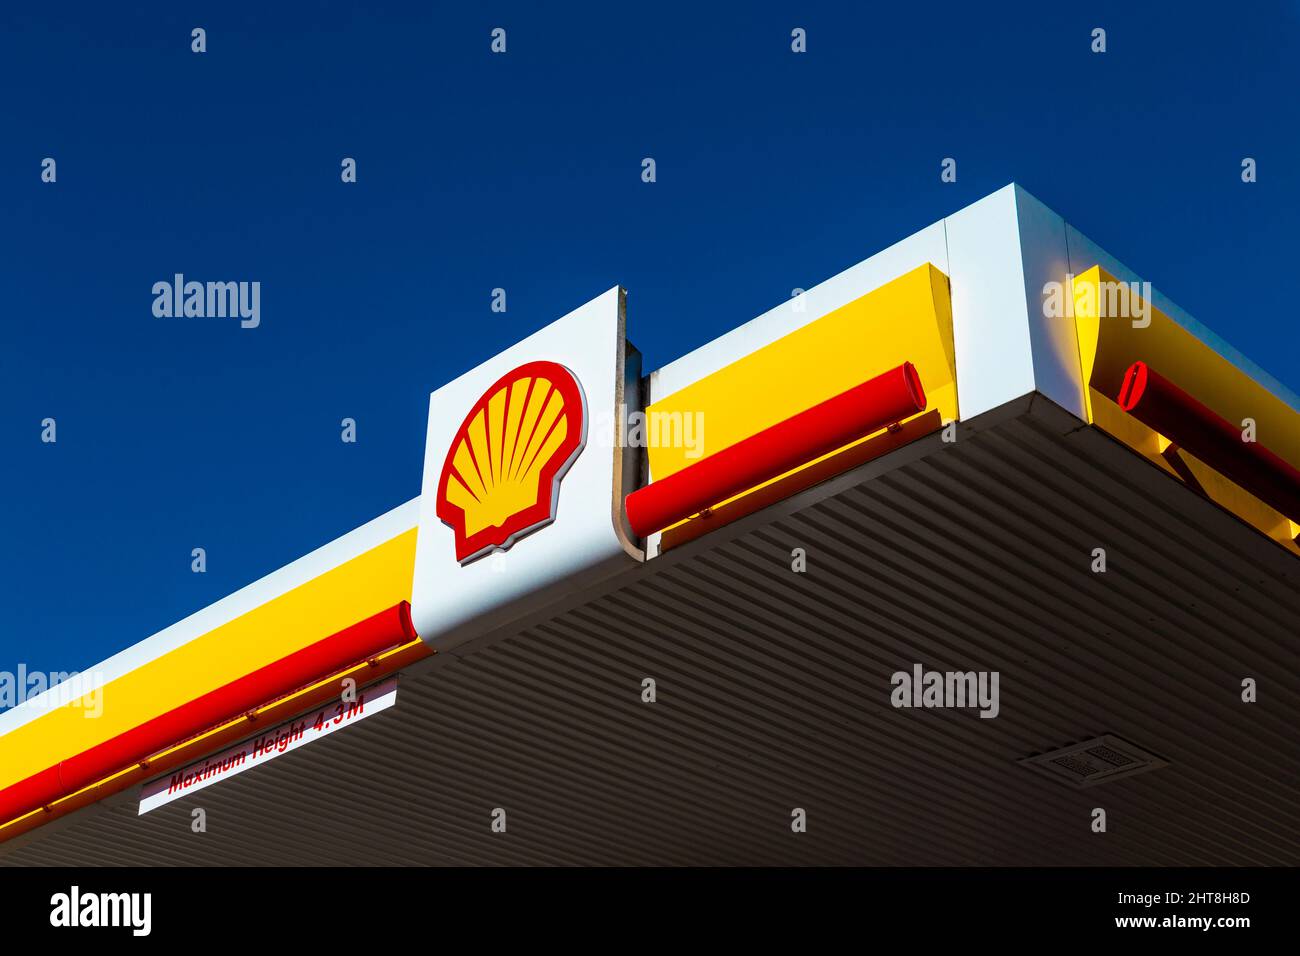 Close-up of Shell oil company logo at one of their petrol stations Stock Photo